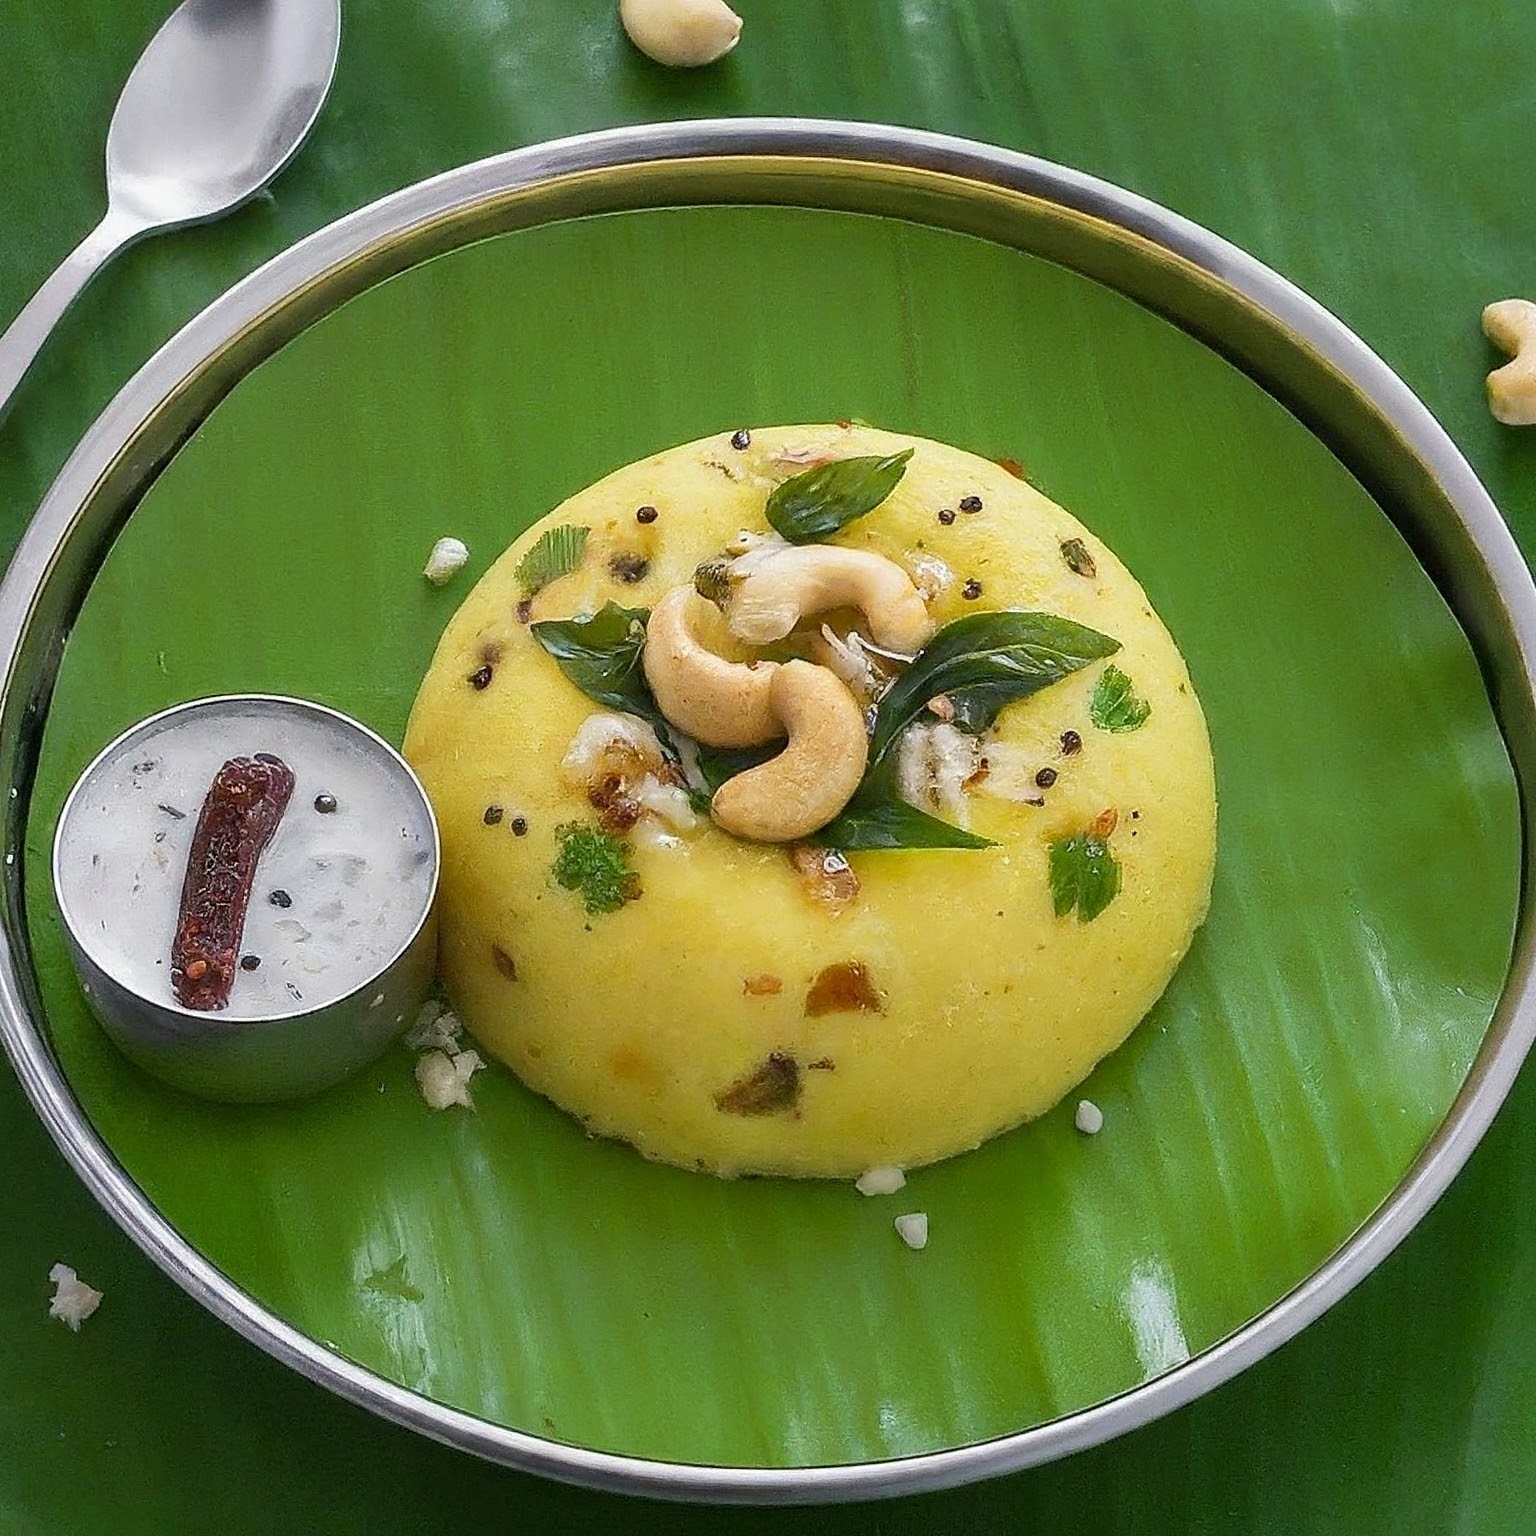 A Rava Upma breakfast served on a banana leaf with coconut chutney, cashews, and curry leaves.